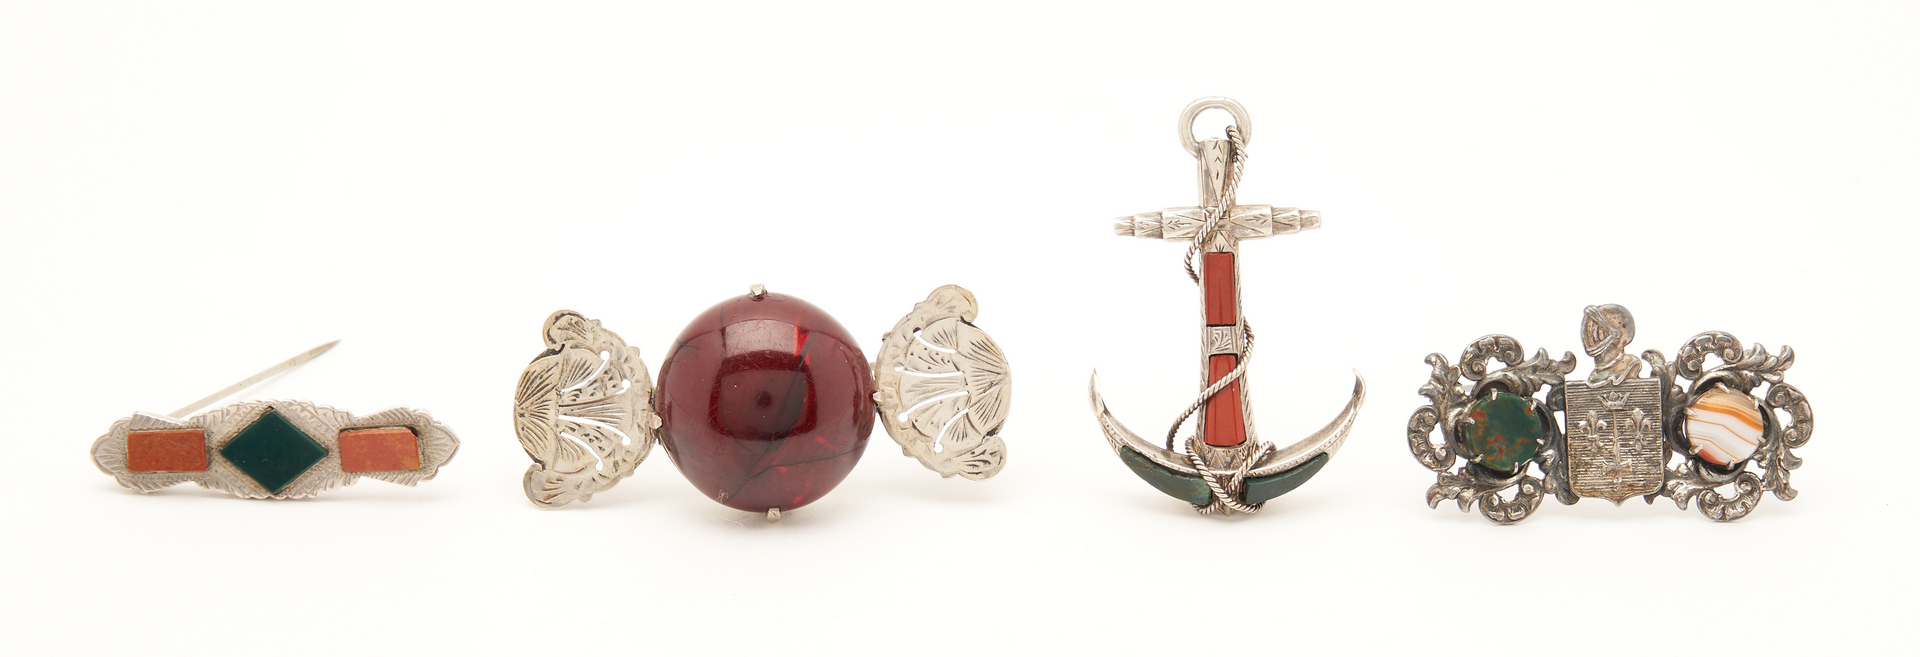 Lot 821: Group of Scottish-style Agate Jewelry, 14 items